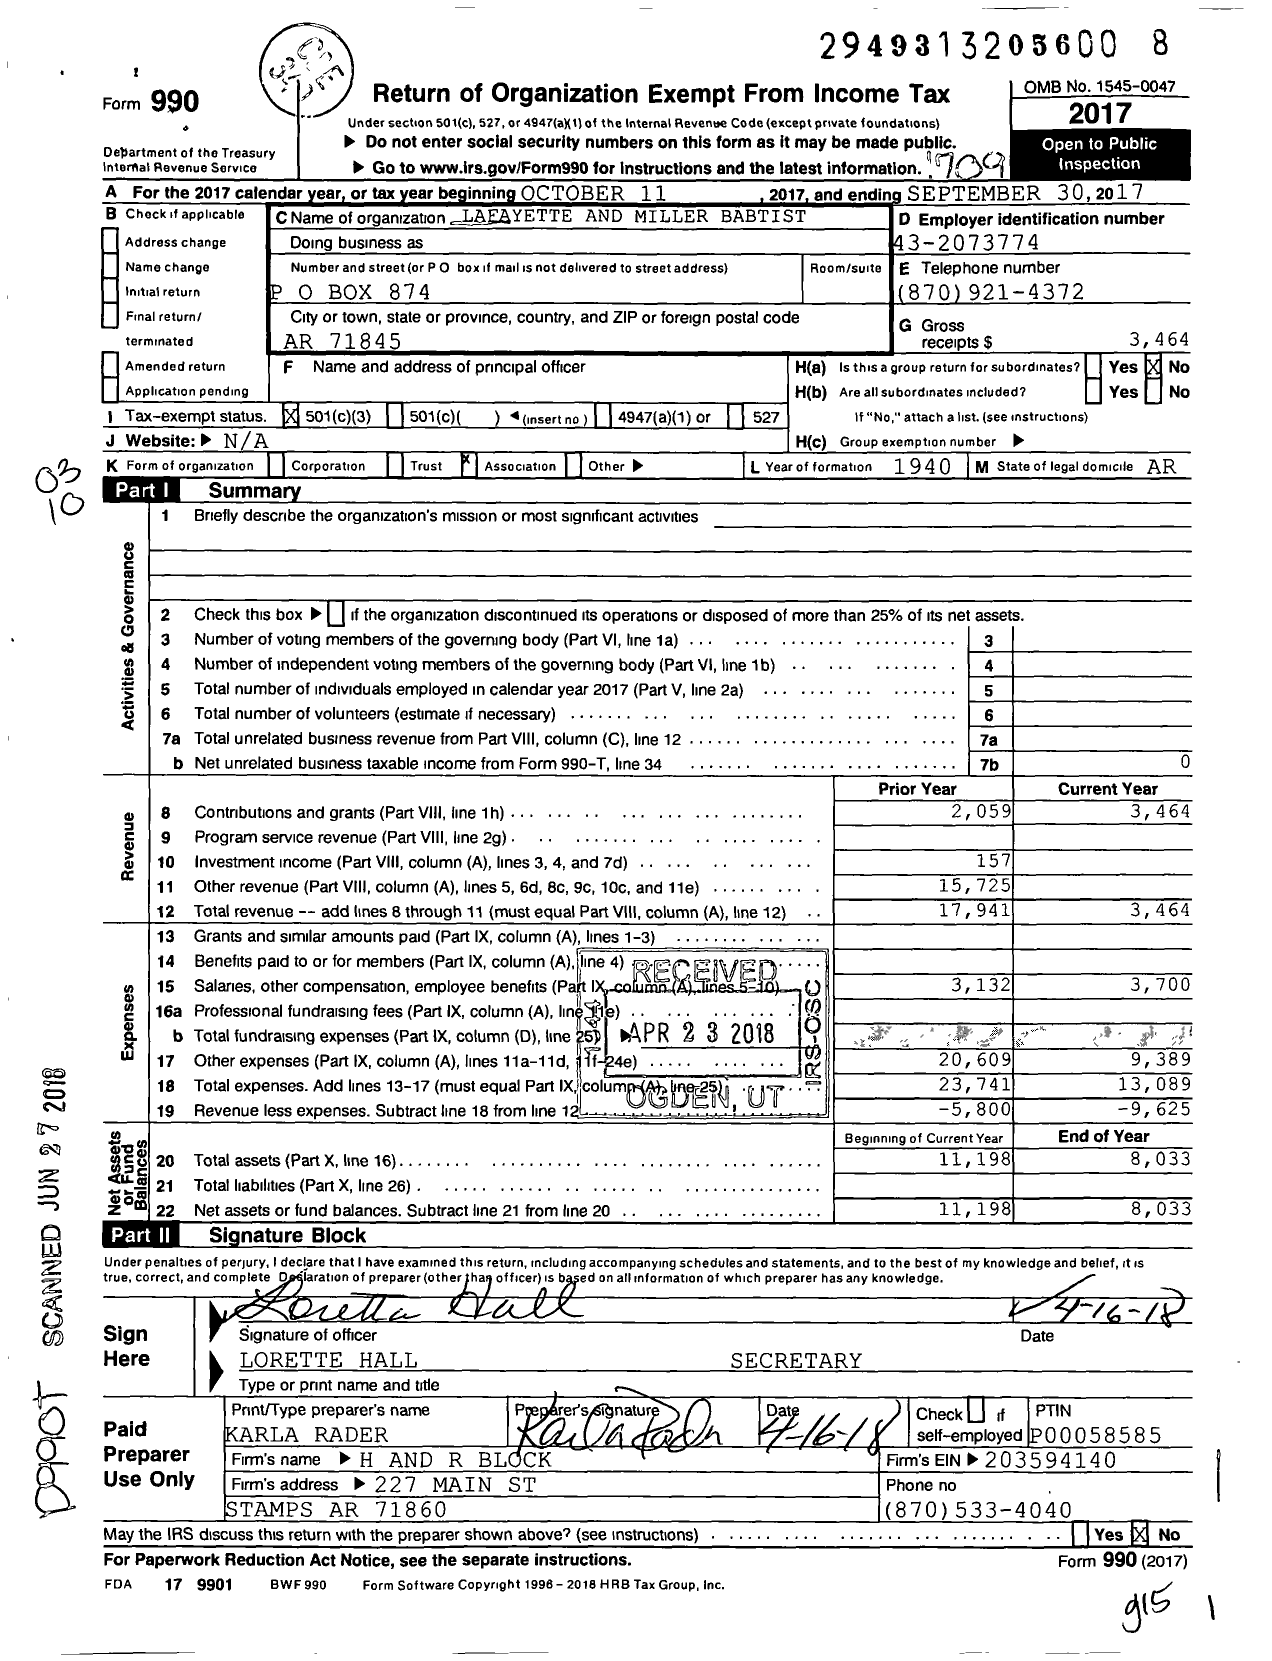 Image of first page of 2016 Form 990 for Lafayette and Miller Baptist